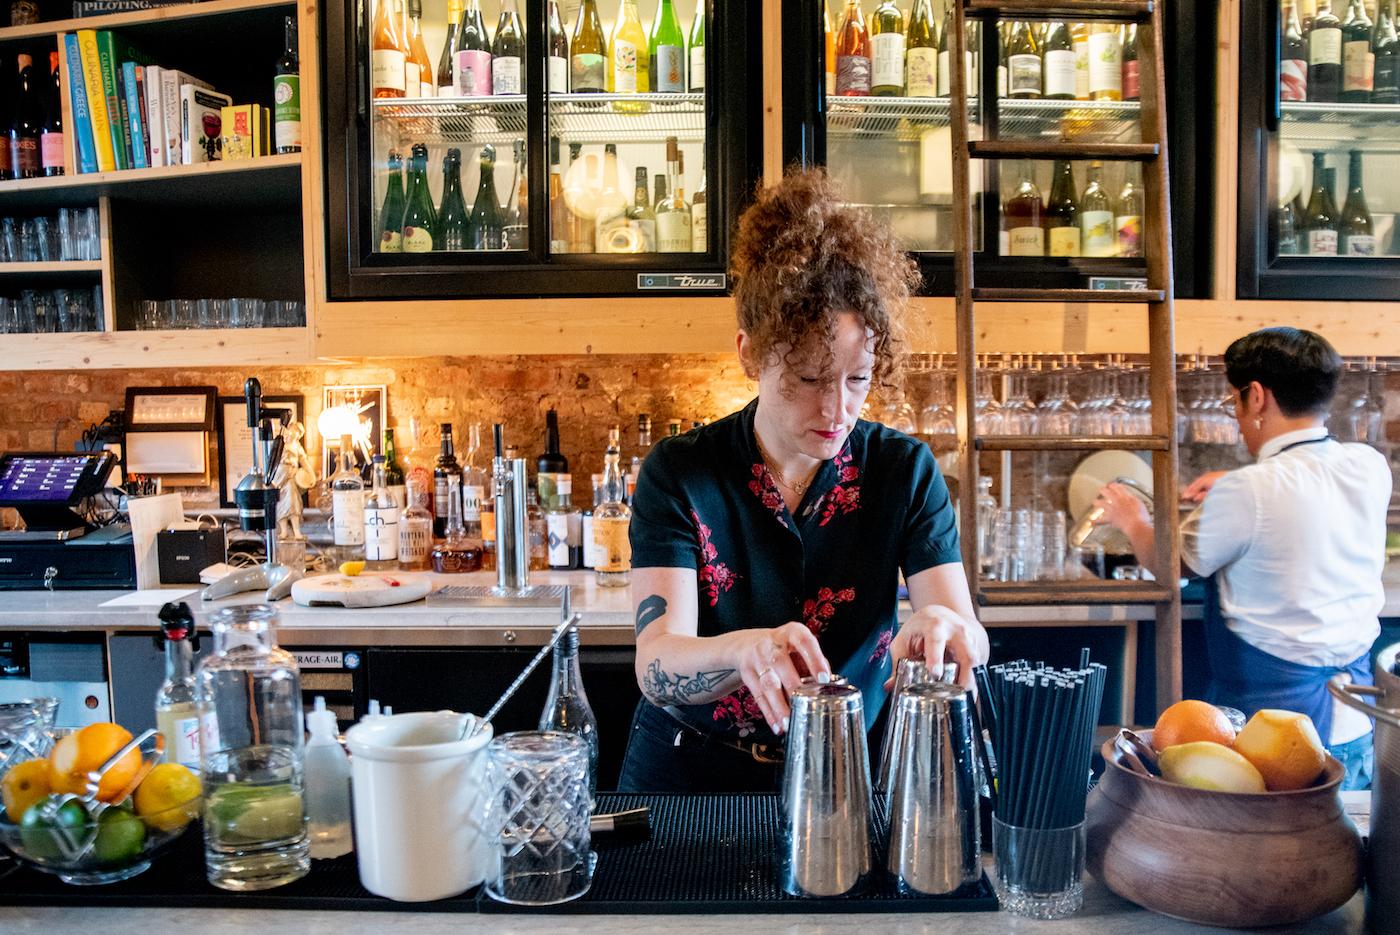 General manager Jessica Line, 36, steps behind the bar during the dinner service at Wherewithall at 3472 N. Elston Ave. in Chicago, Illinois. Photo: WTTW/Kathleen Hinkel